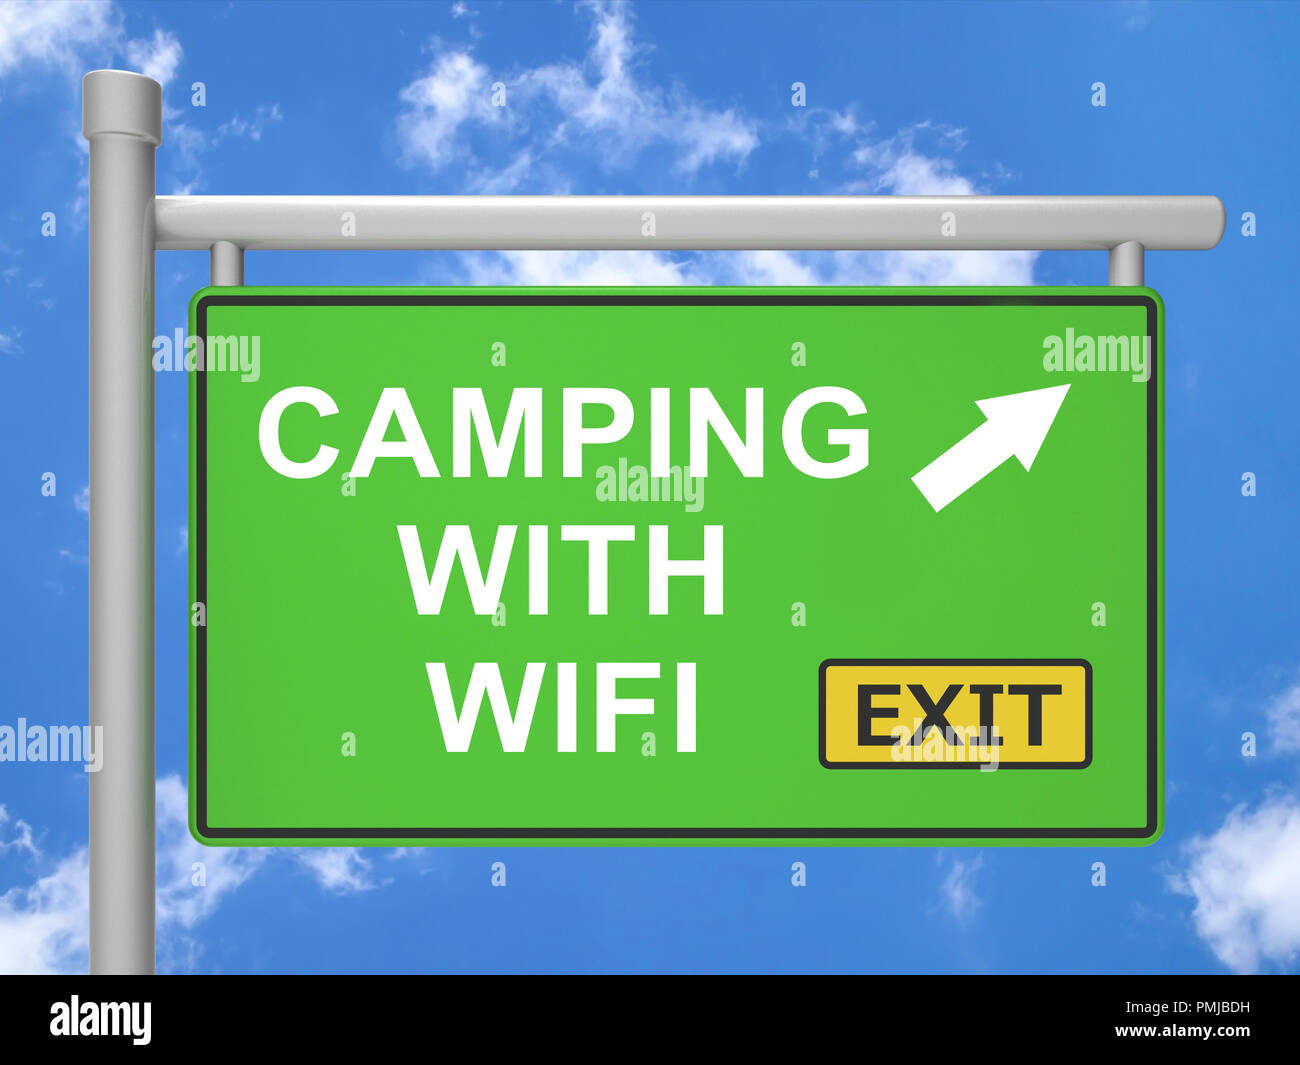 Wifi Camping Internet Access Outside 3d Illustration Means Tourist Travel Campsite Hotspot And Vacation Campground Signal Stock Photo